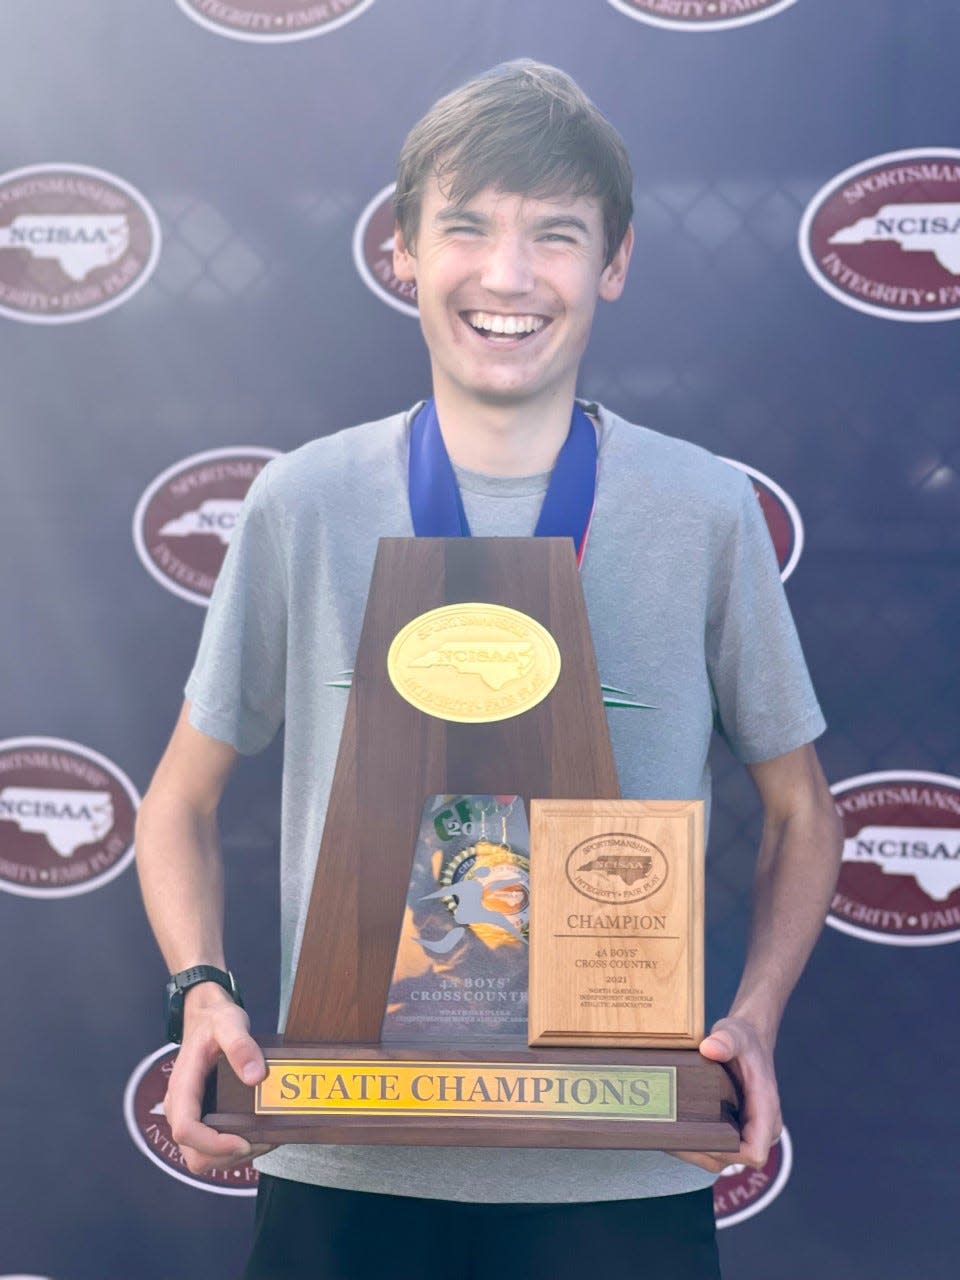 Christ School junior Rocky Hansen, the 2021 All-WNC cross country Runner of the Year, poses with trophies after winning the NCISAA Div. 4 state championship.